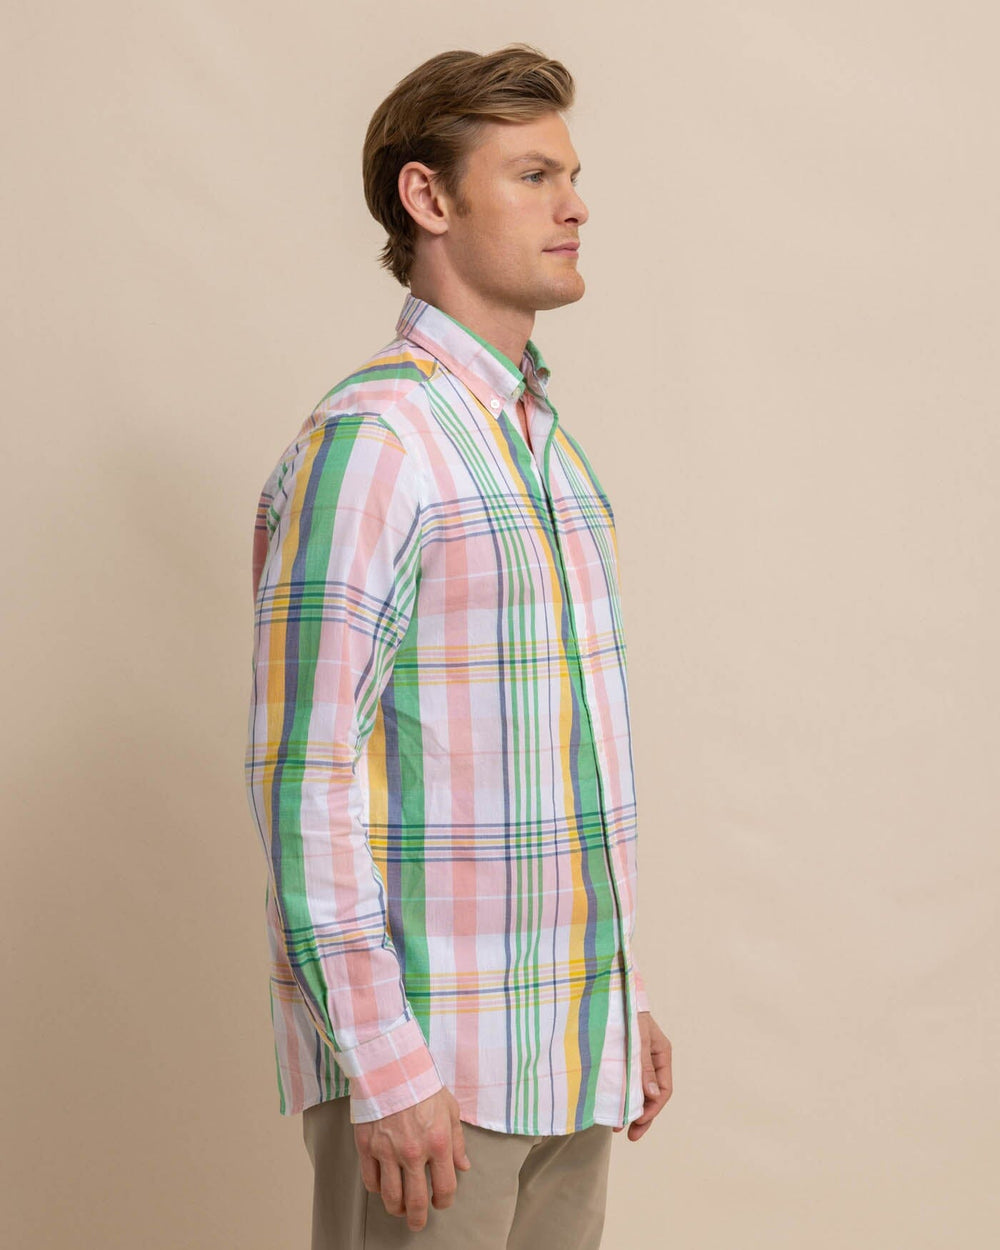 The front view of the Southern Tide Springers Point Madras Plaid Long Sleeve Sport Shirt by Southern Tide - Classic White